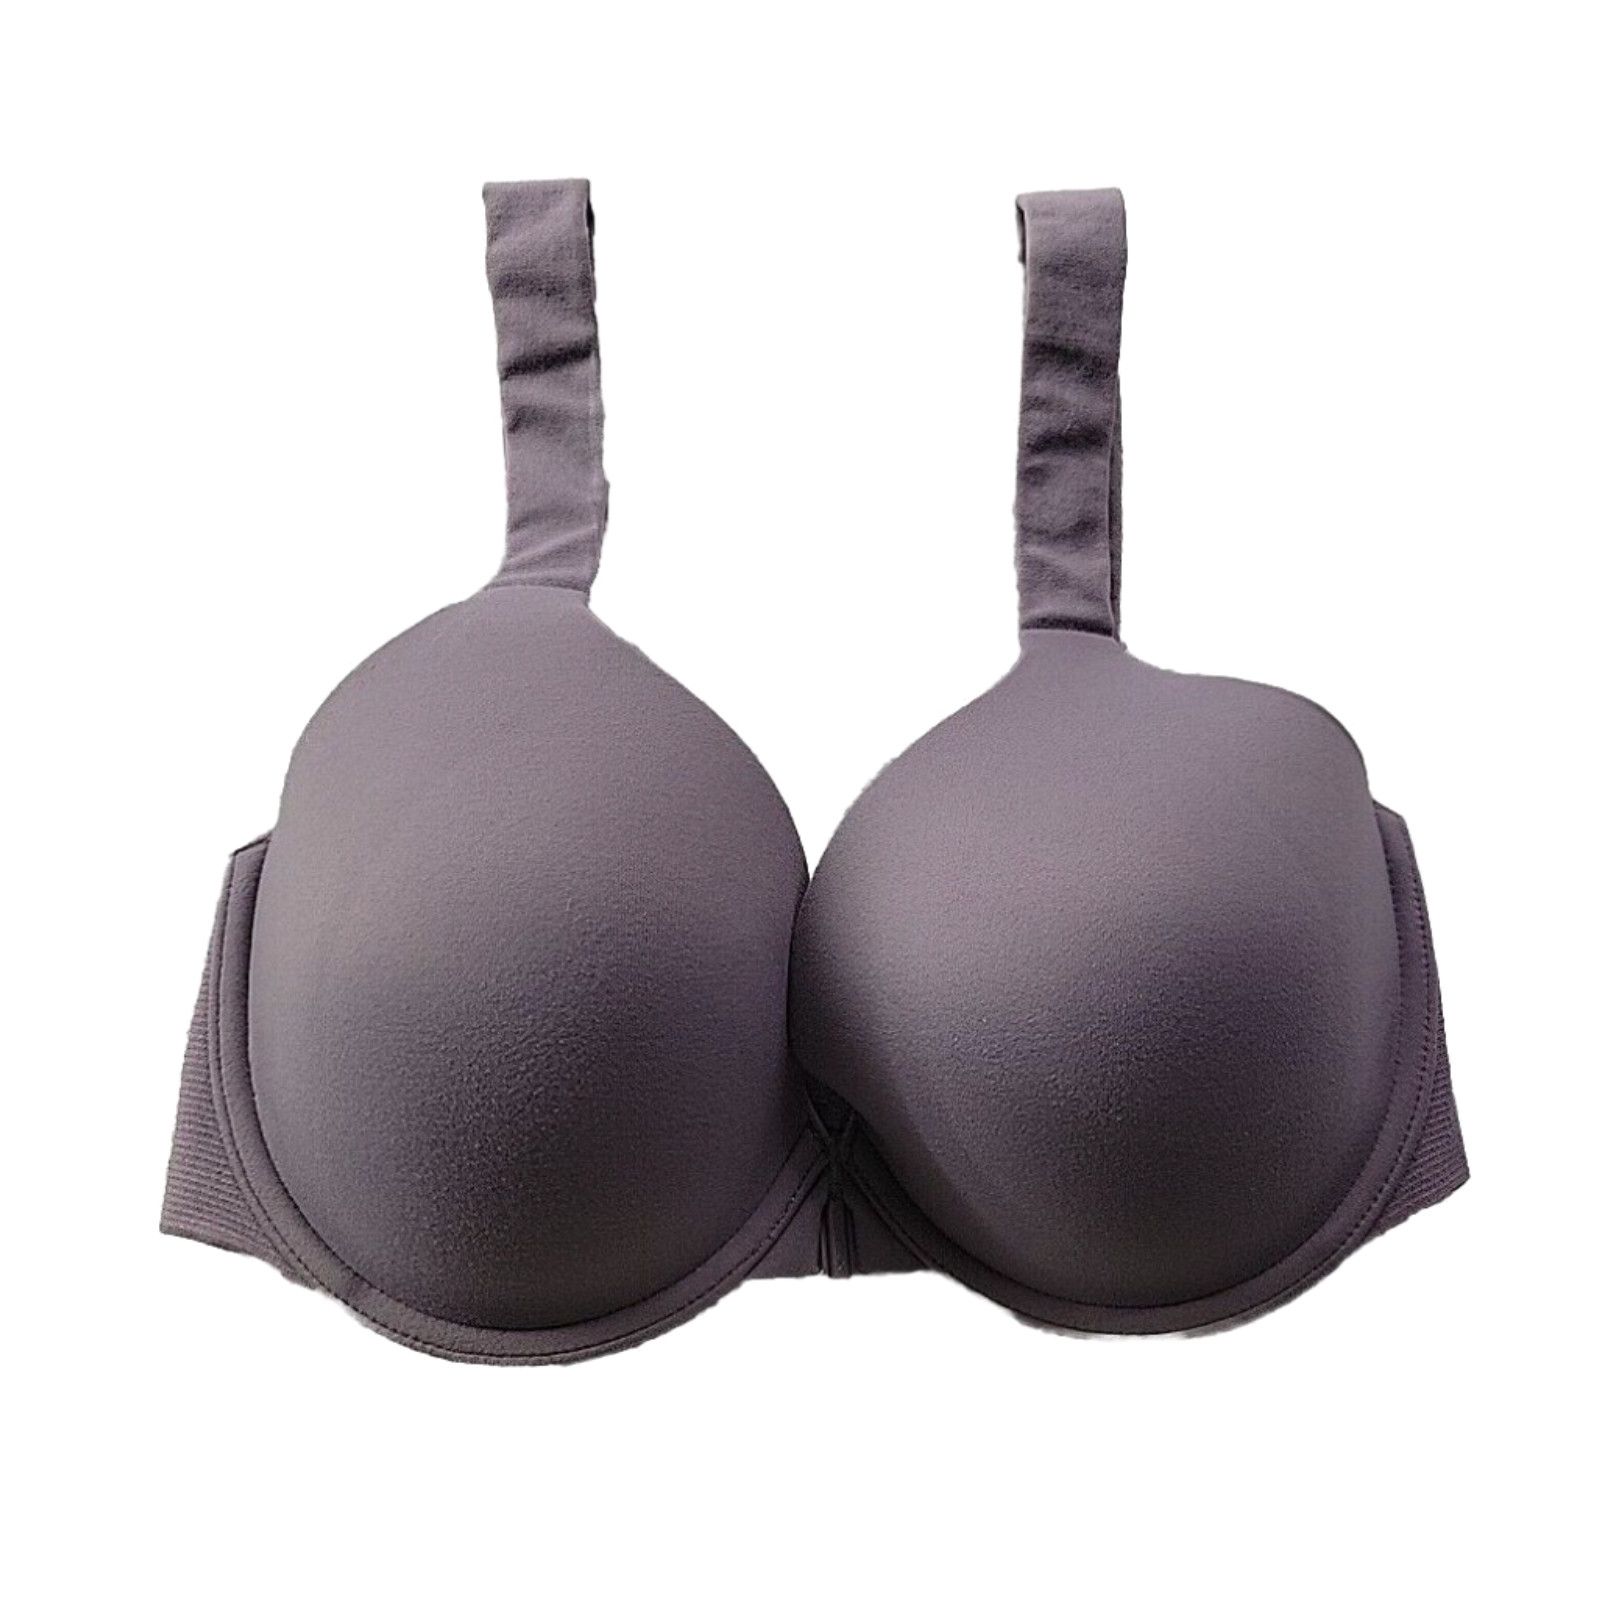 Spanx Spanx 34DD BRA-LLELUJAH Bra Front Closure Comfort Mauve Purple Underwired Lined Size ONE SIZE - 1 Preview